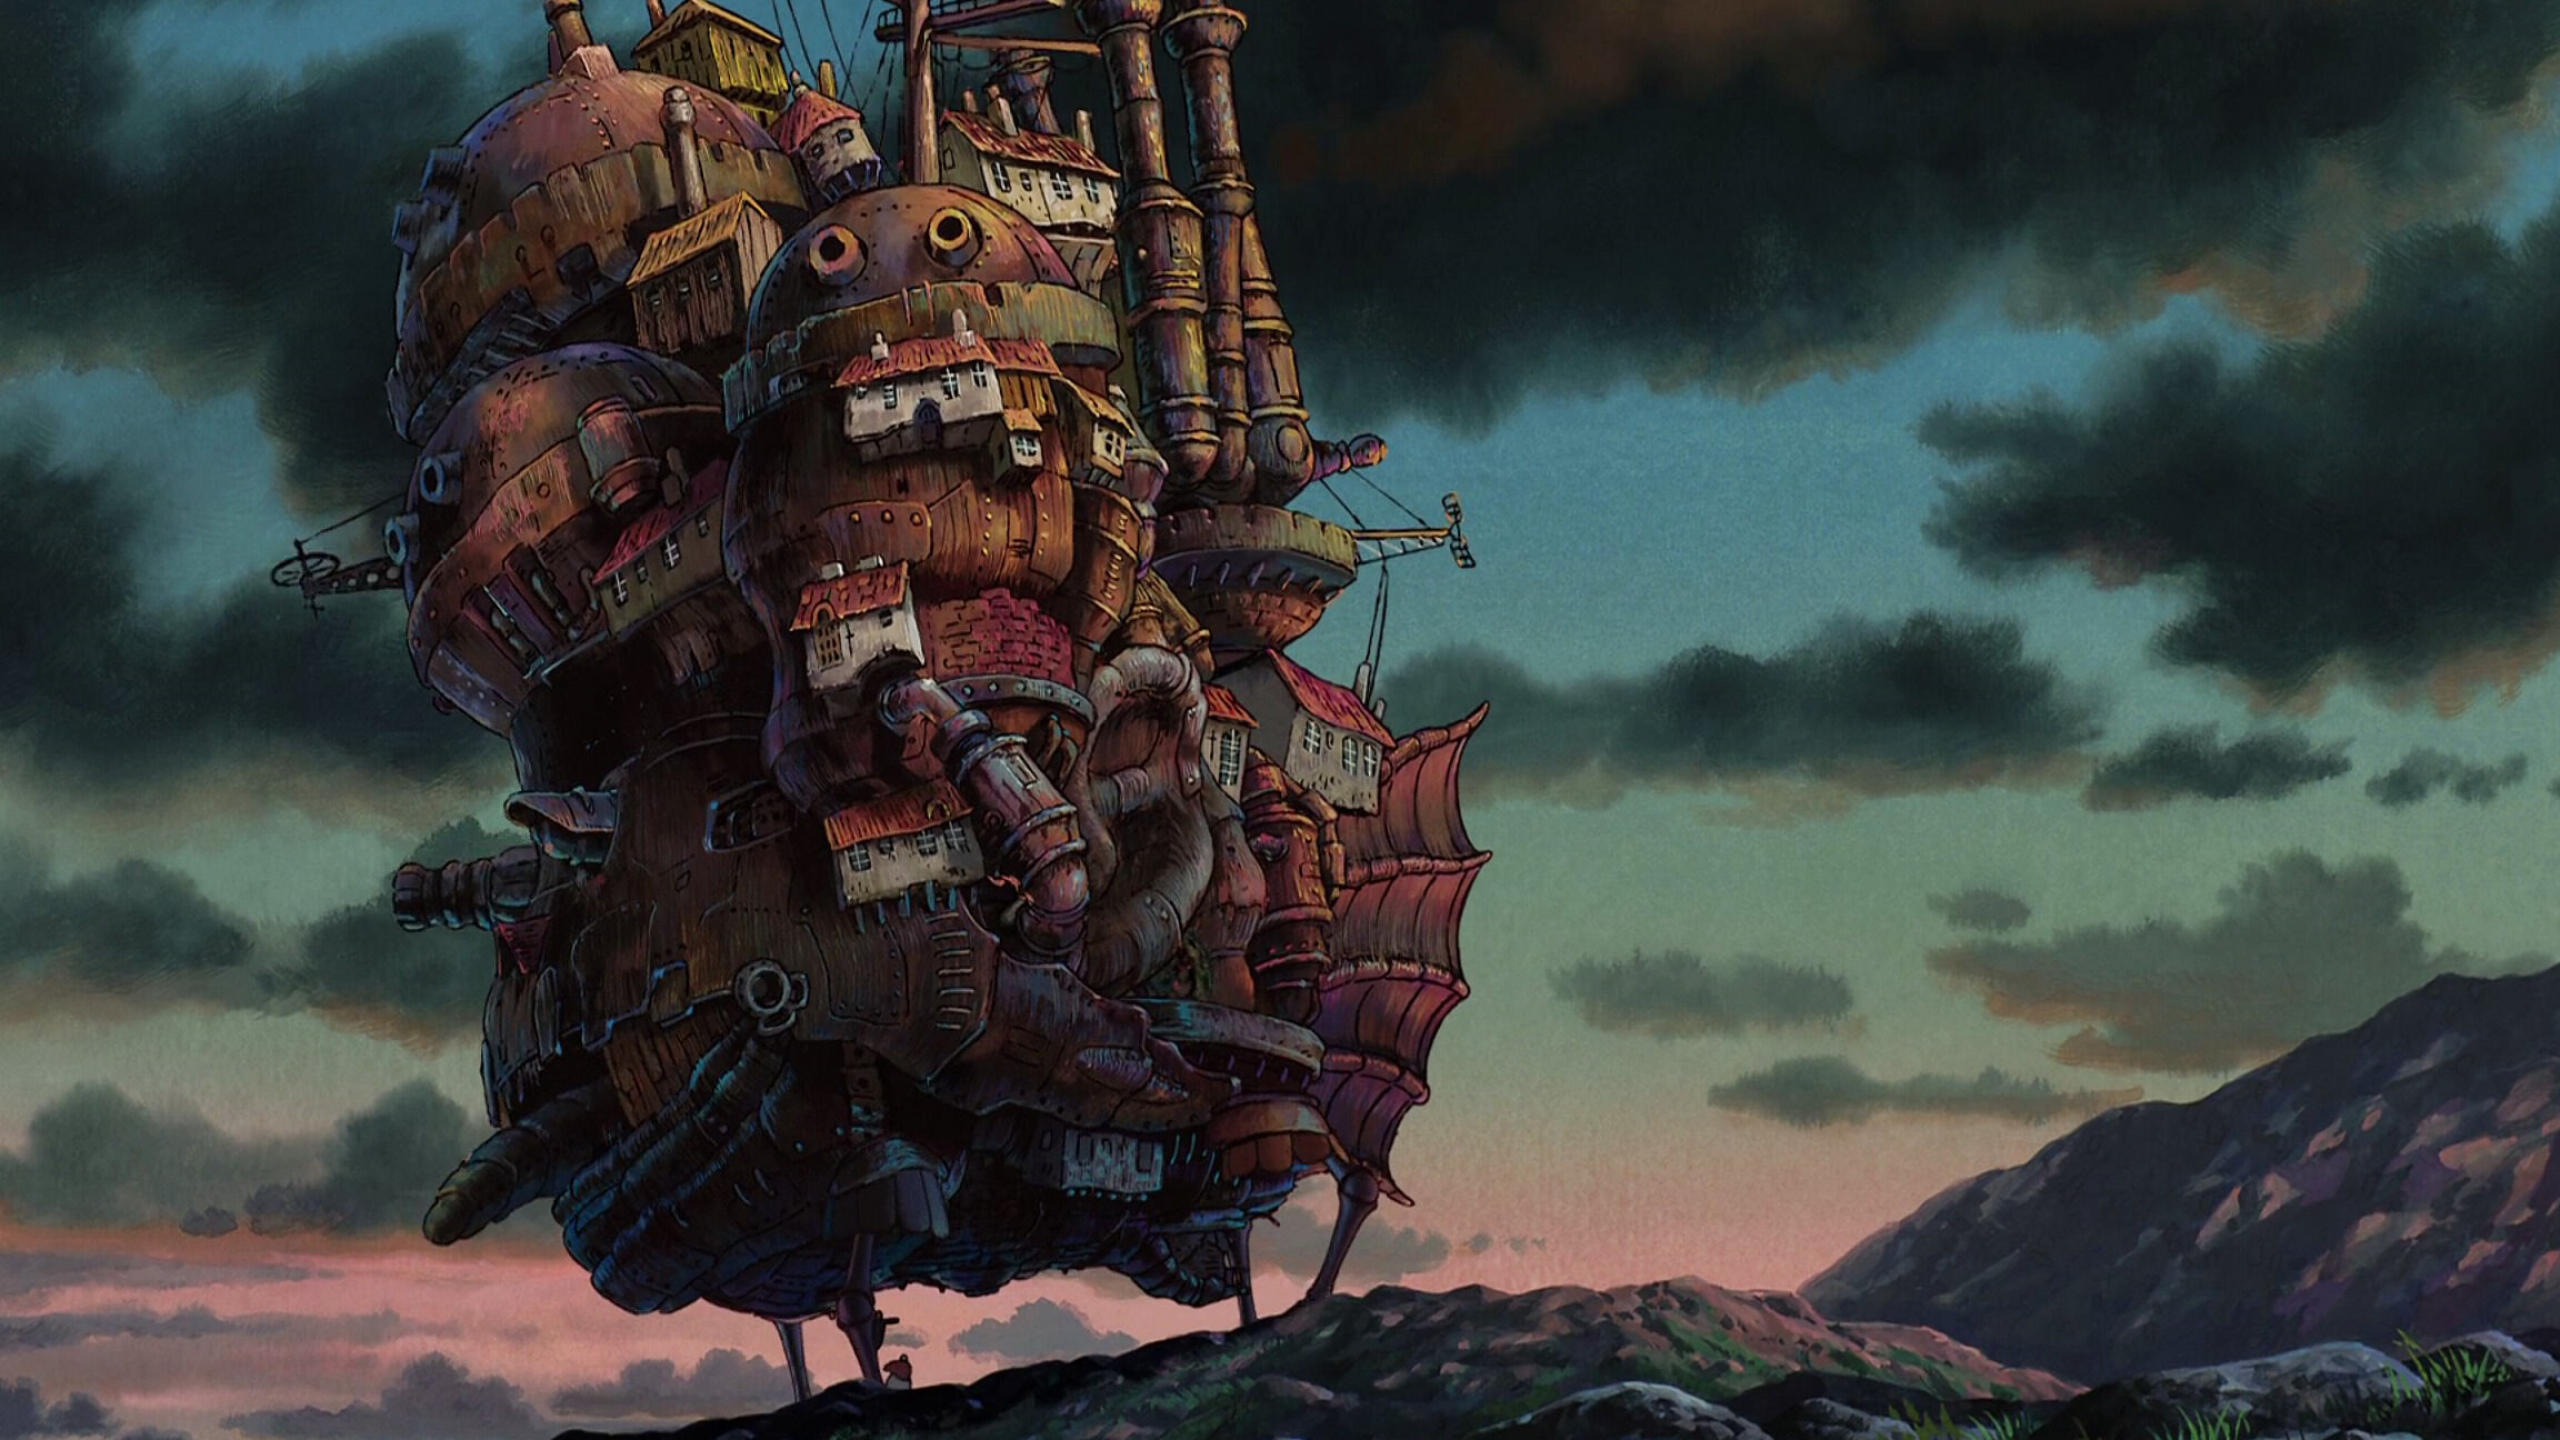 Studio Ghibli: Howl's Moving Castle, The film was produced by Toshio Suzuki. 2560x1440 HD Background.